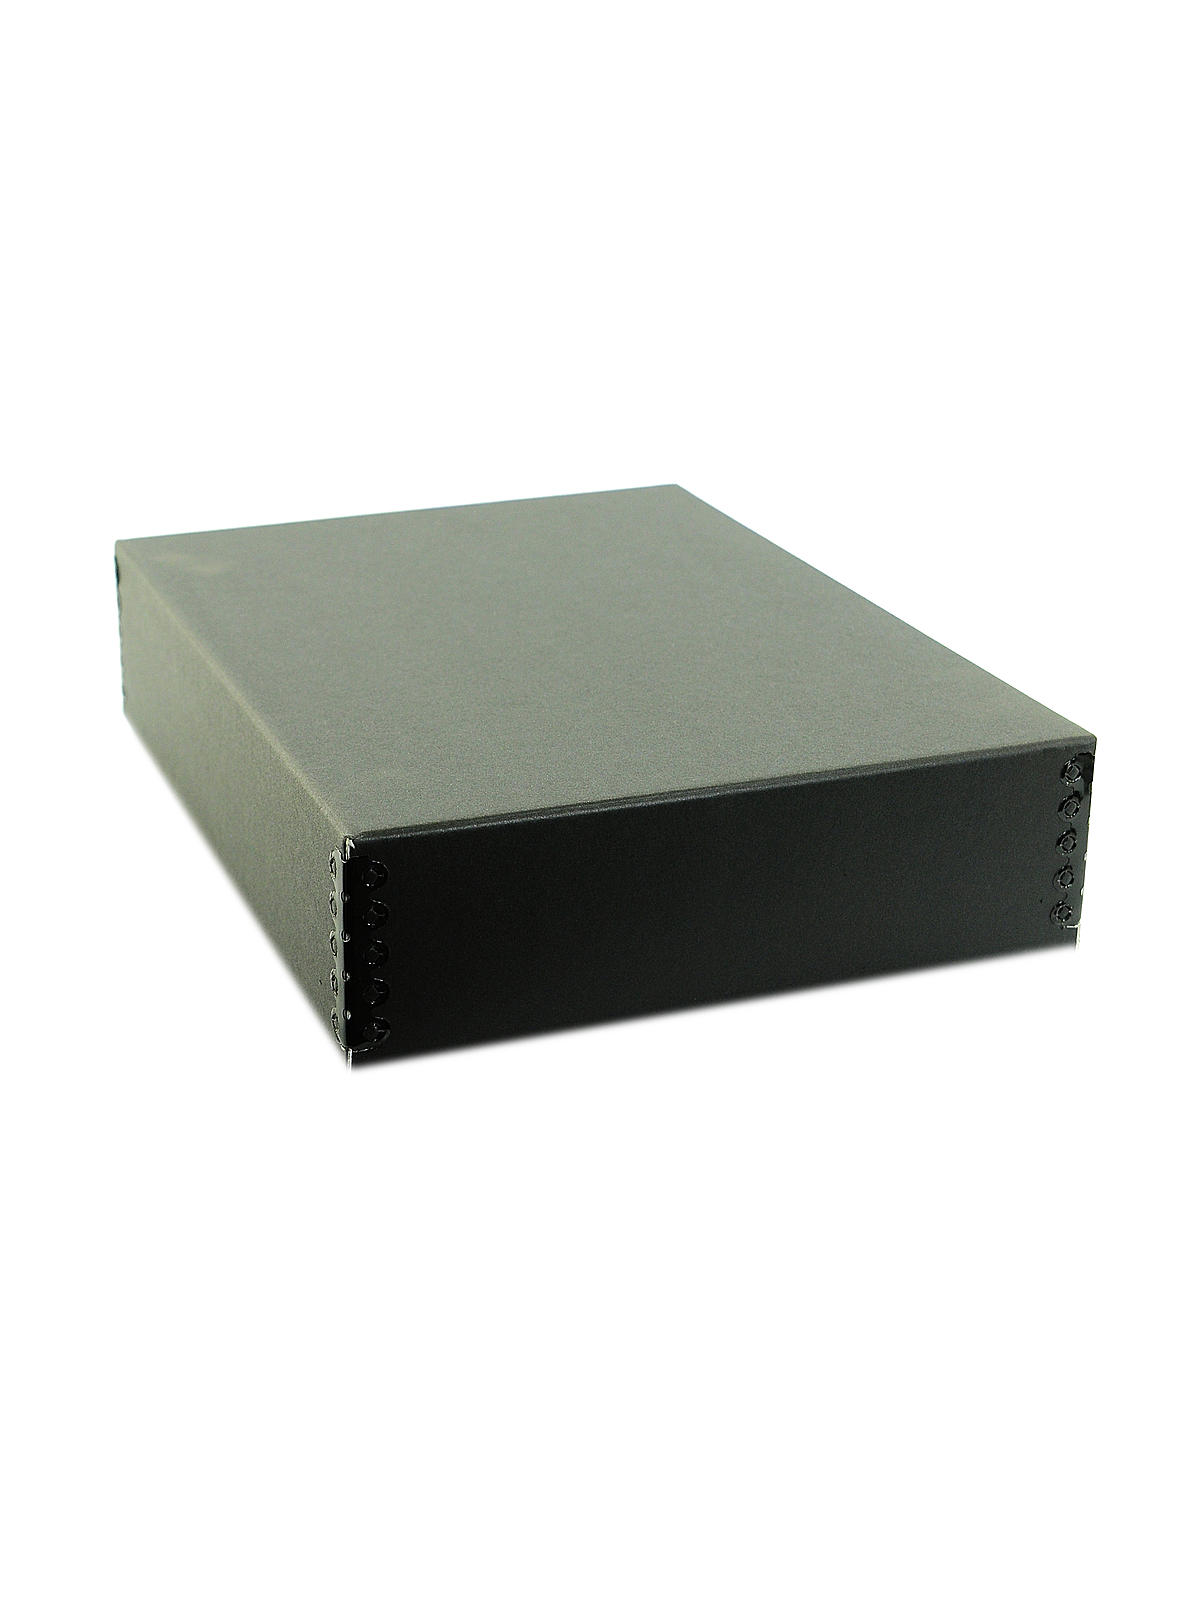 Drop-front Storage Boxes Black 11 In. X 14 In. X 3 In.